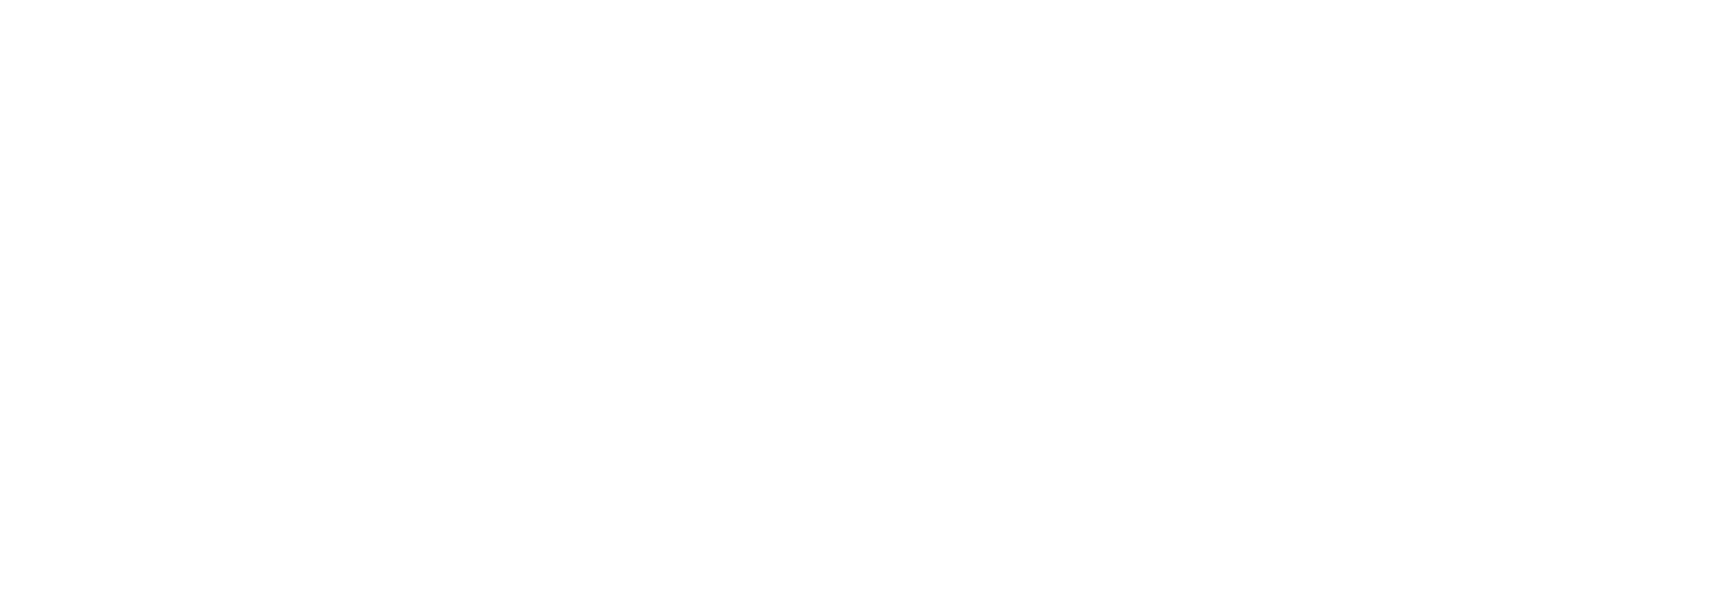 The Mosaic Arena, Event Details